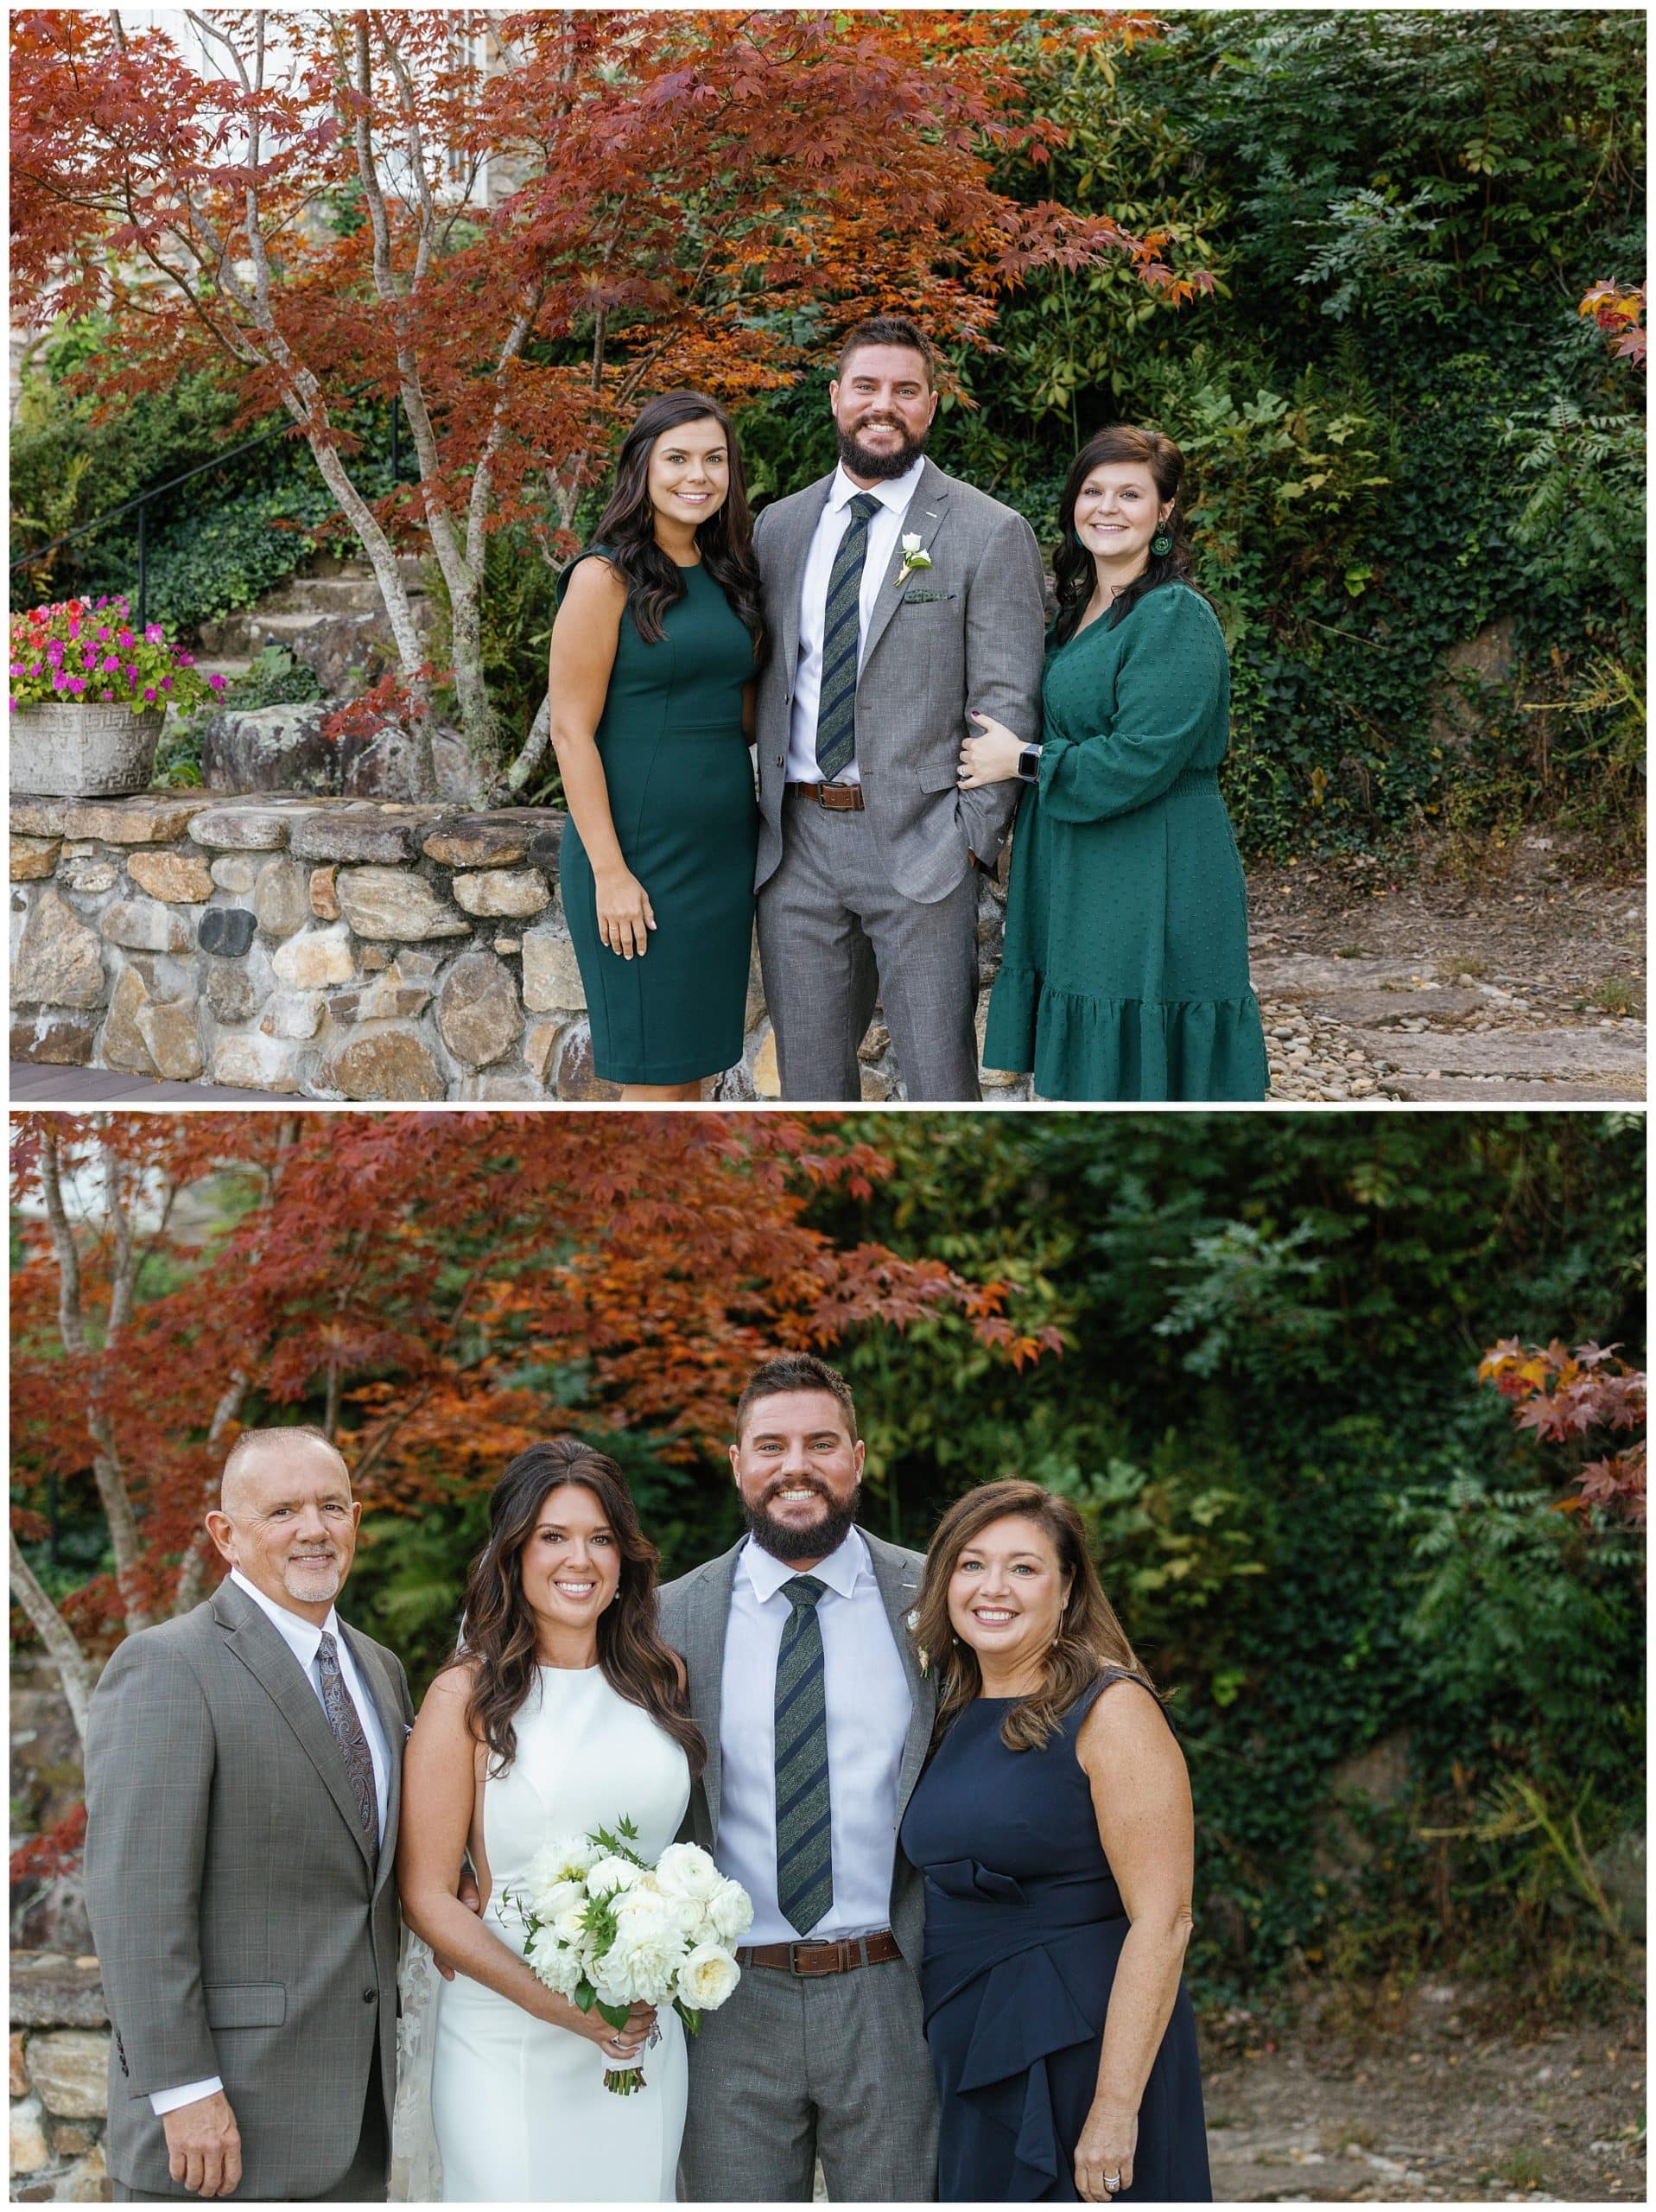 Family photos after a wedding ceremony